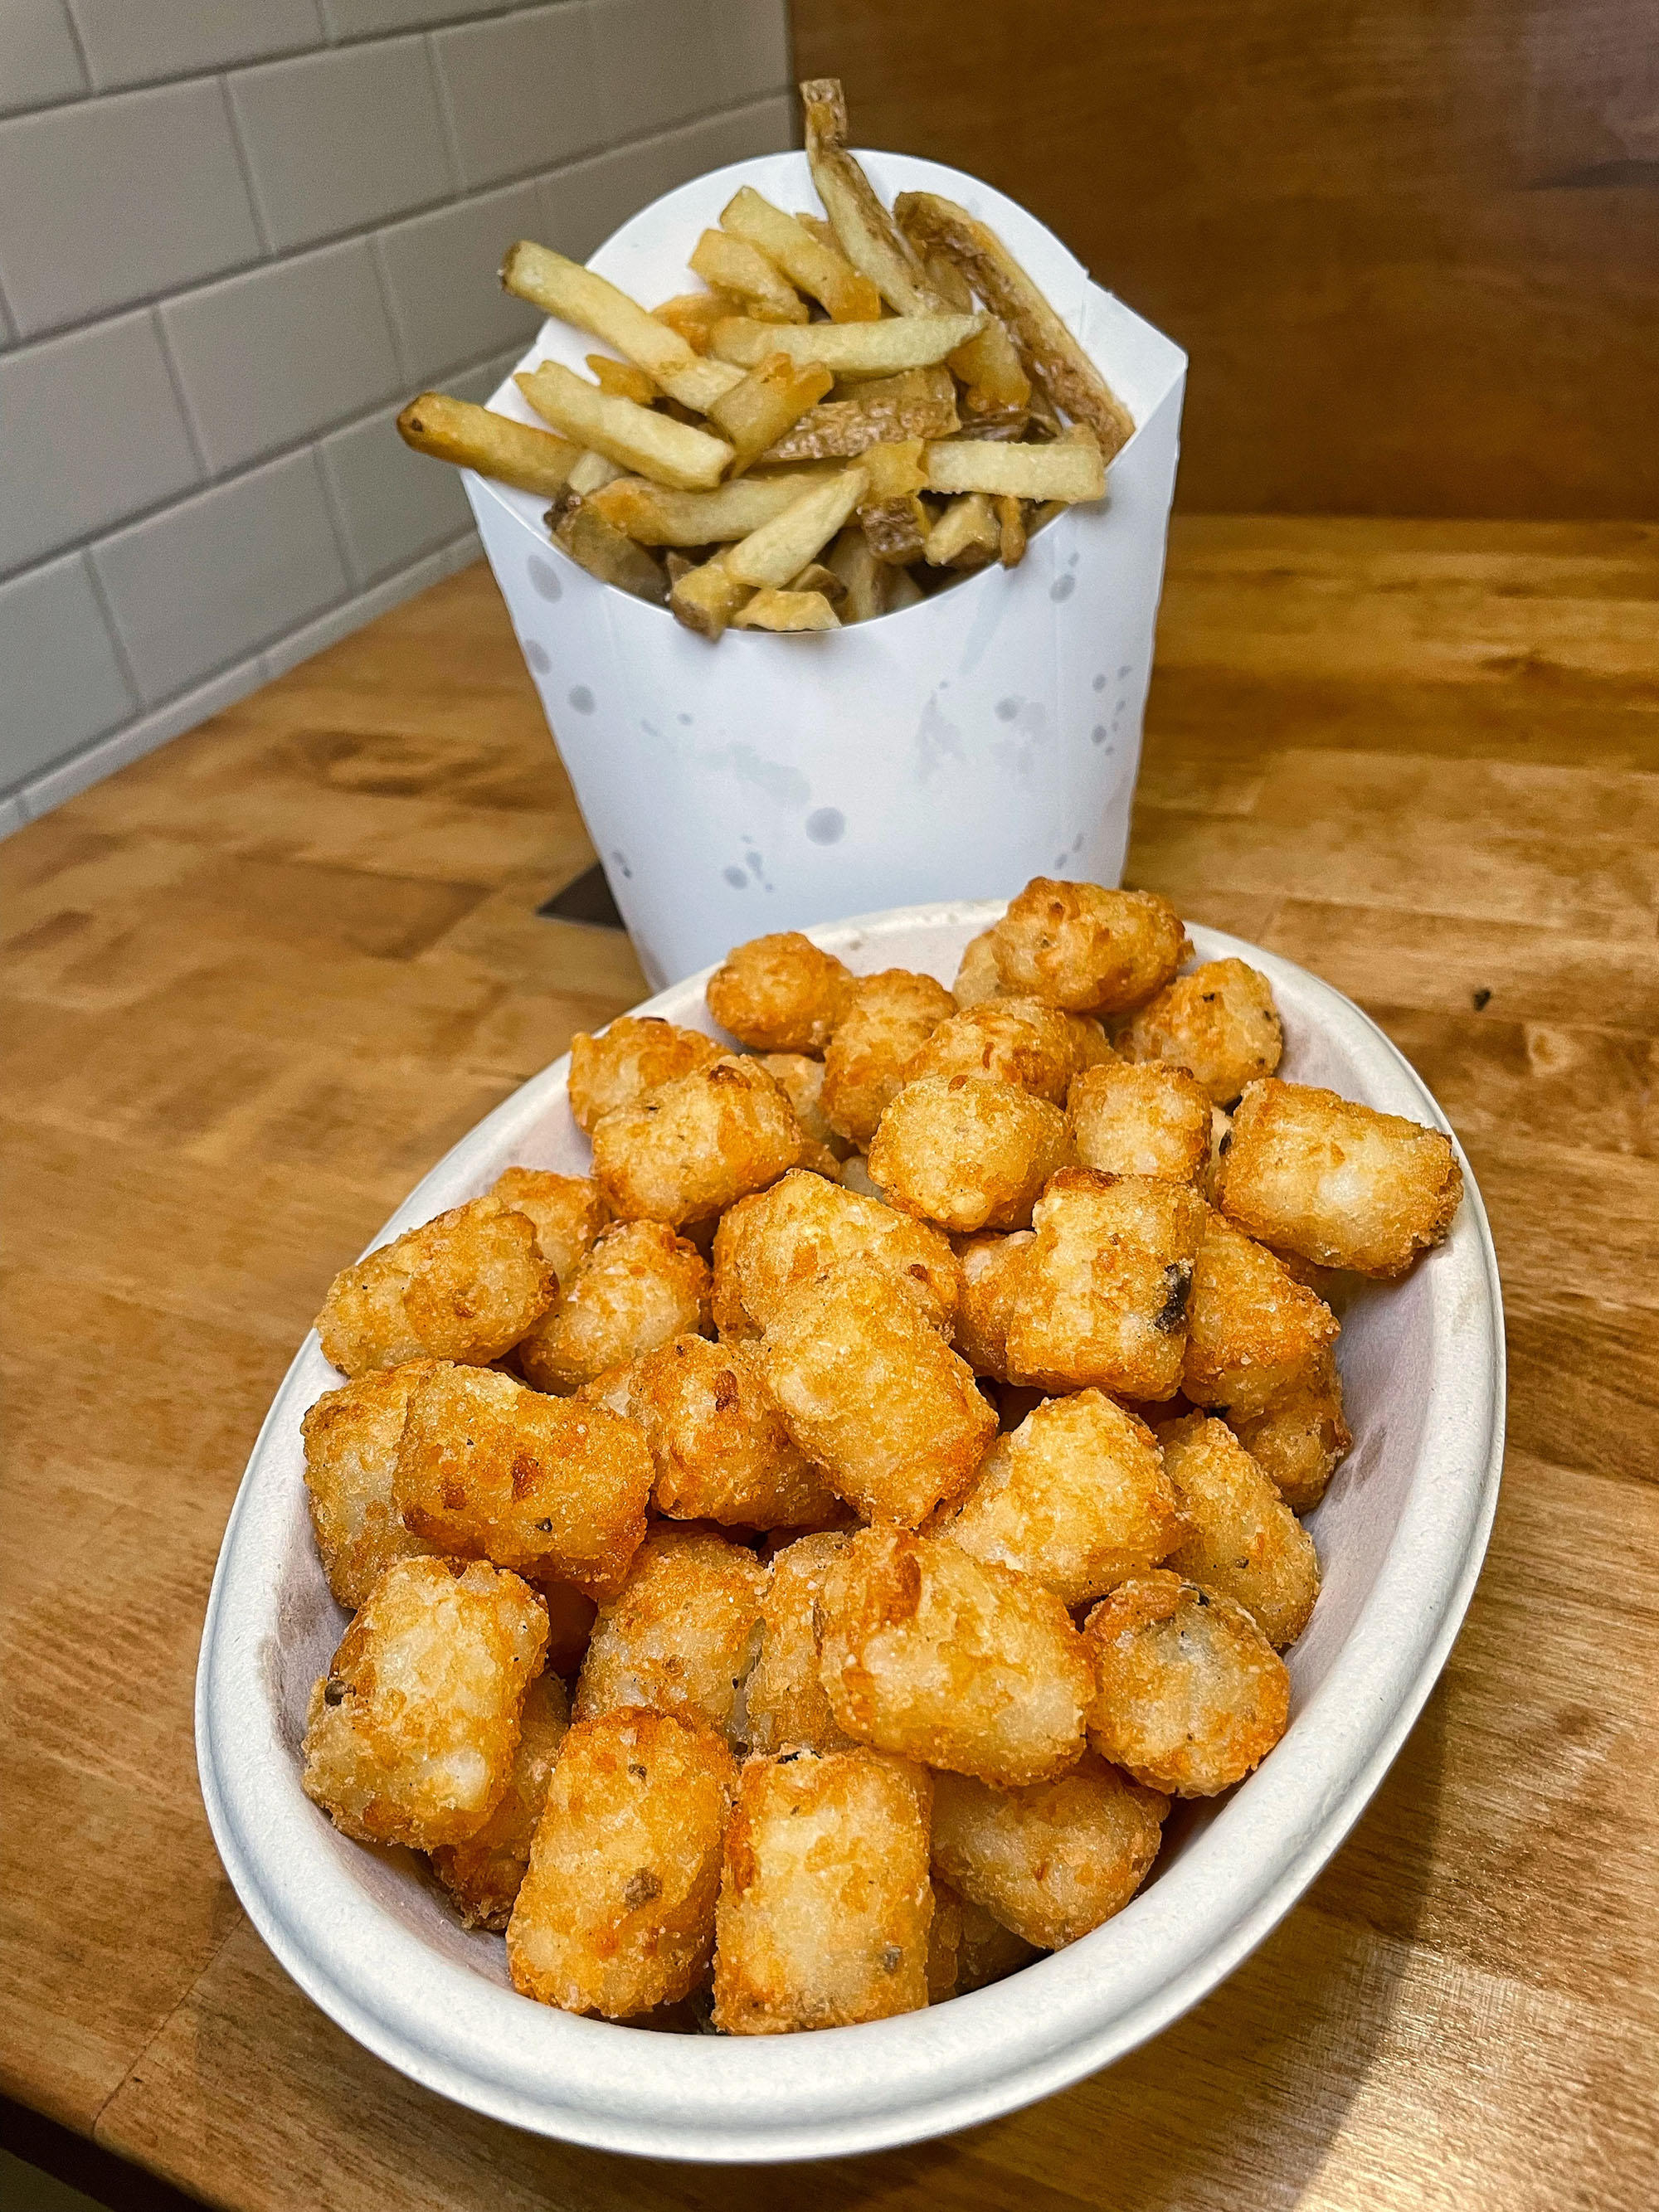 FRIES AND TATER TOTS